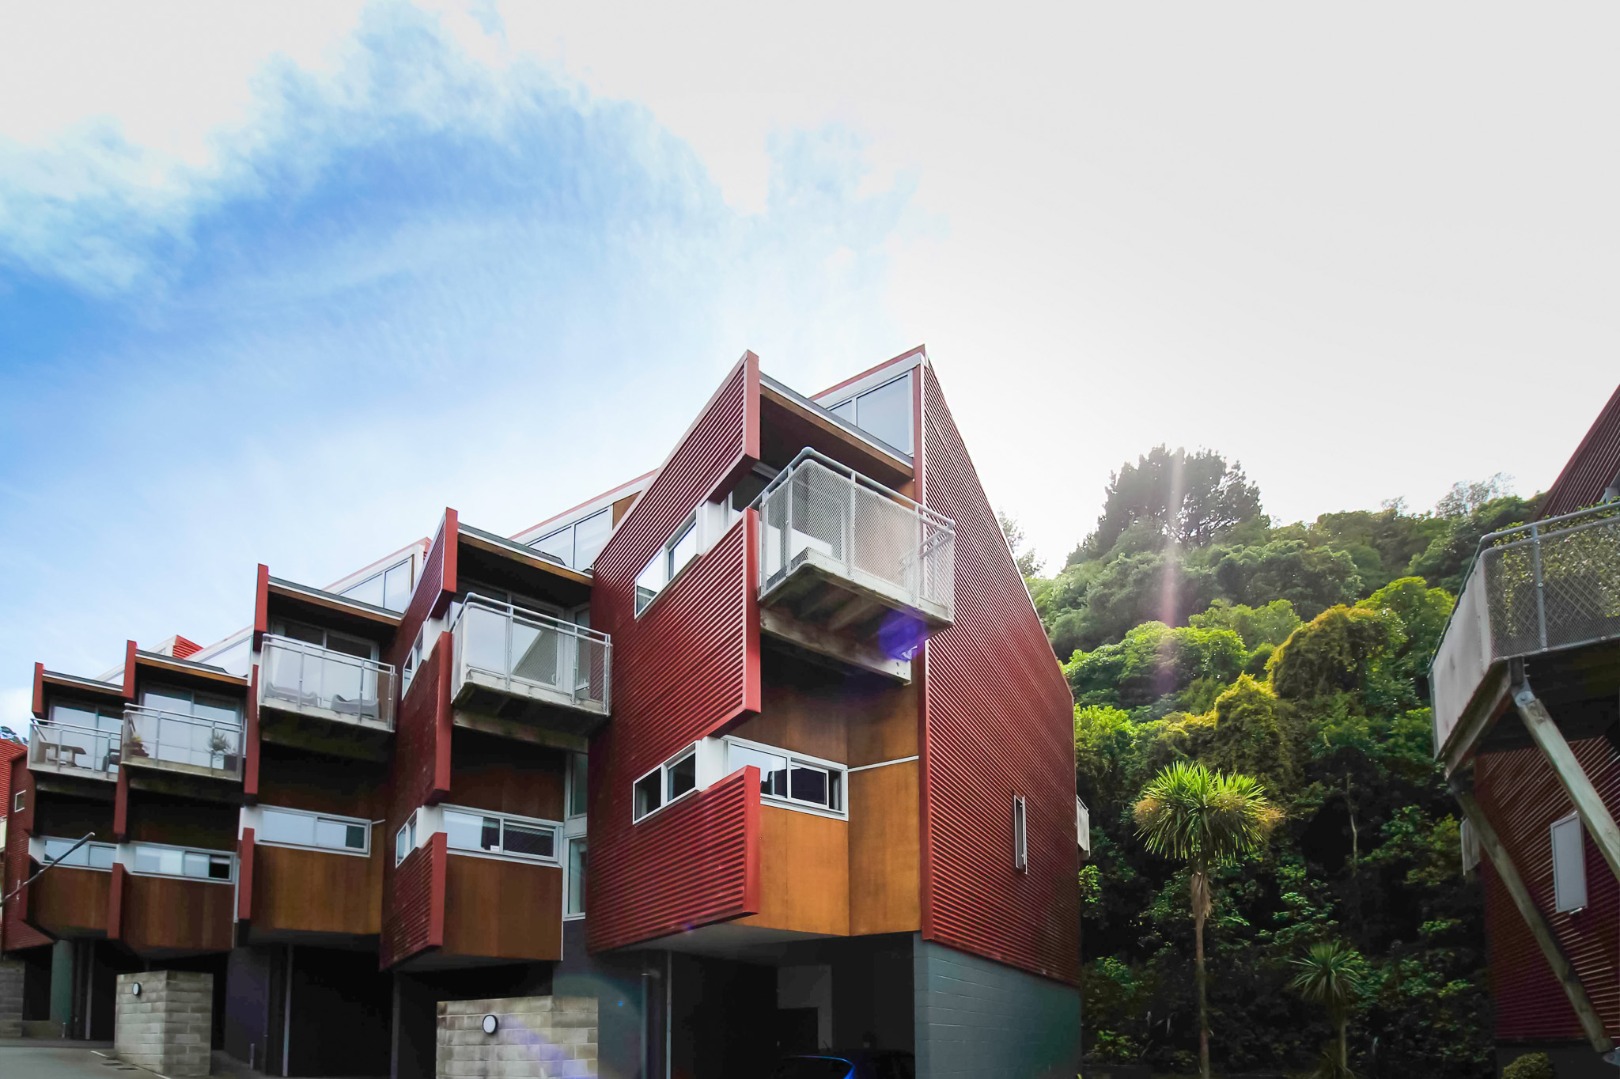 Real Estate For Rent Houses & Apartments : Lovely townhouse 7 minutes away from the CBD, Wellington